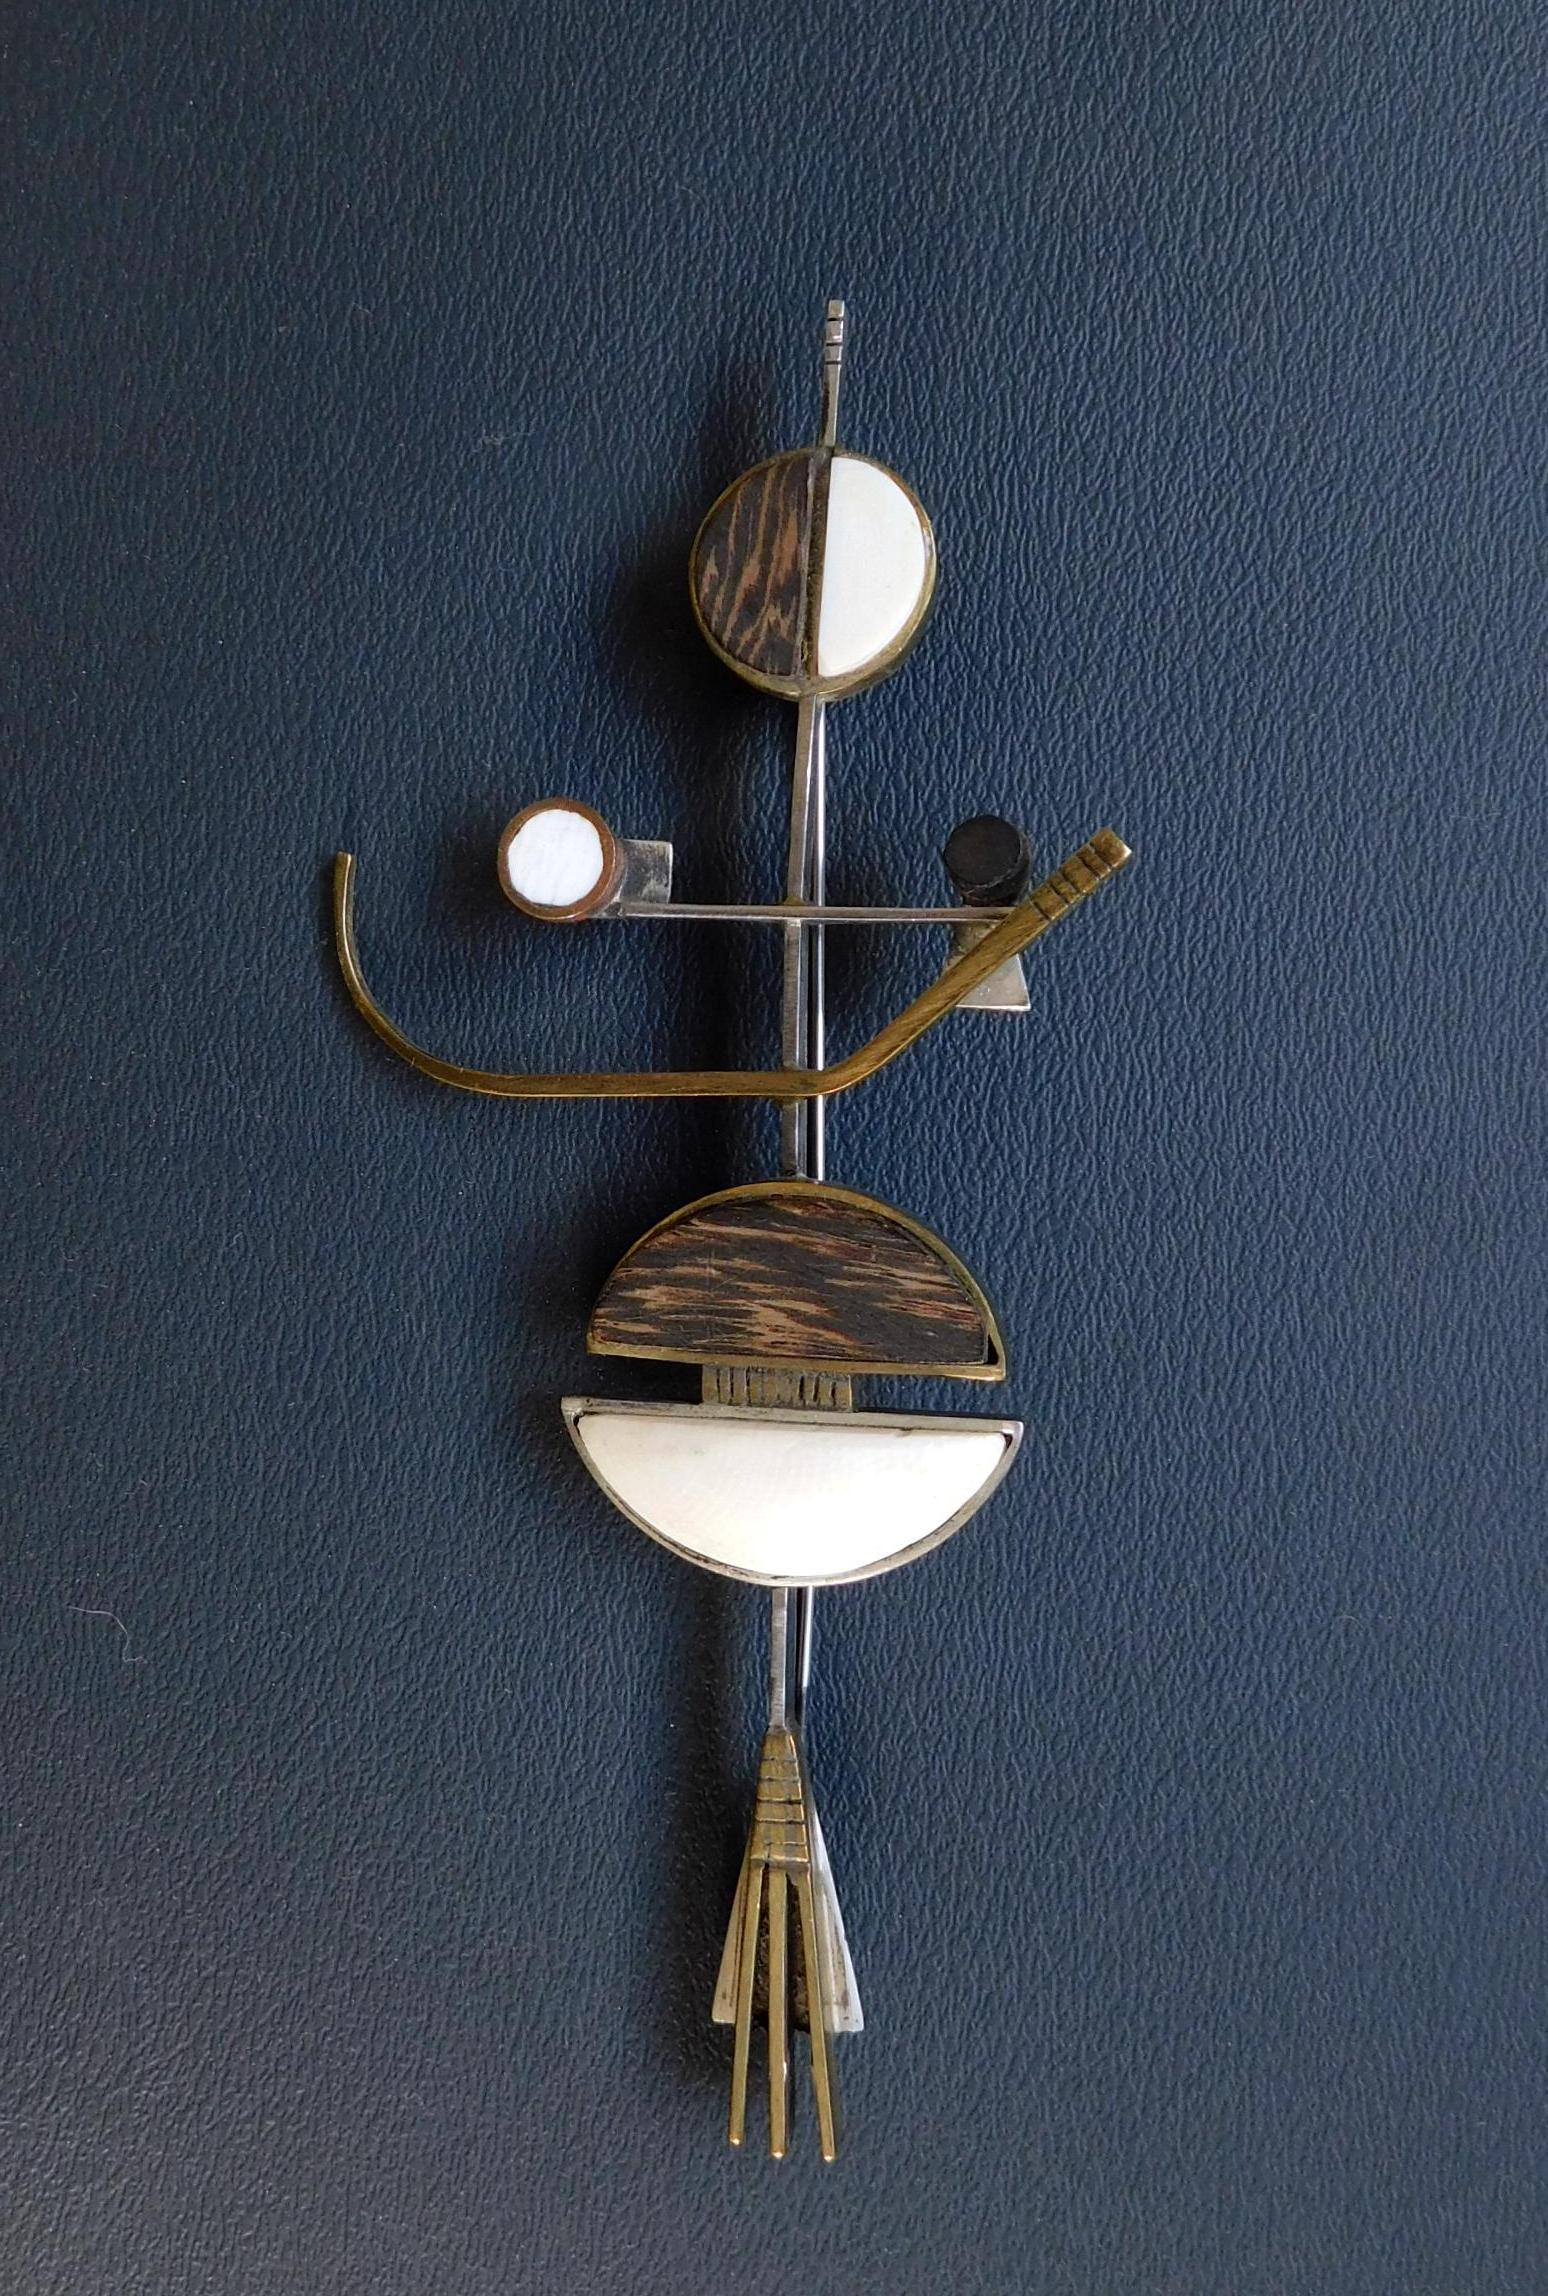 Important abstract elongated geometric form Peter Macchiarini studio brooch. 
Copper and sterling set with ebony, bone and mahogany in spherical and hemispherical shapes. 
The brooch is quite large and measures 6